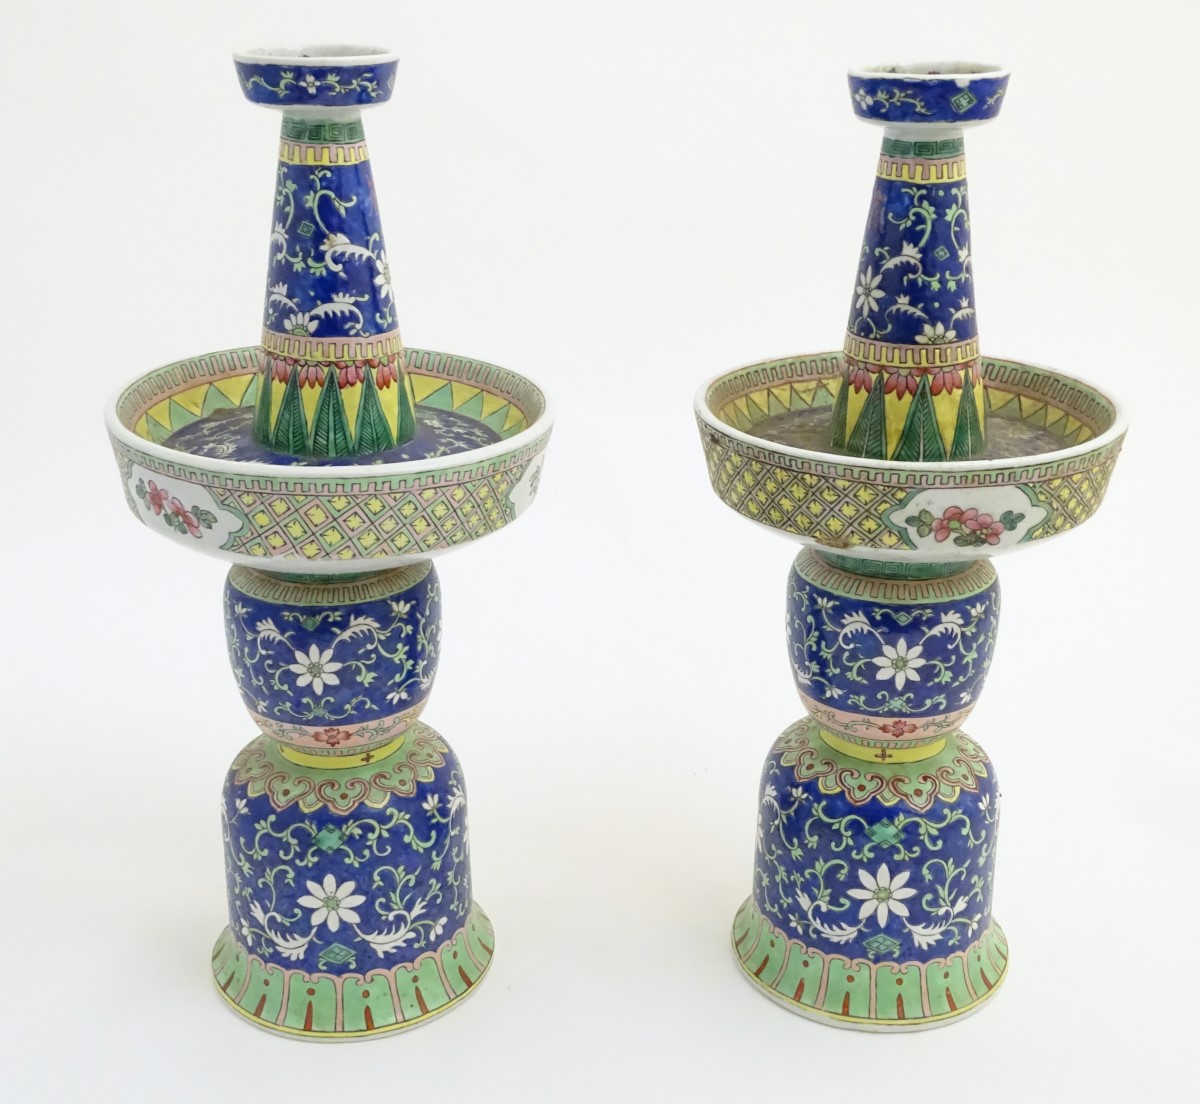 A pair of two-sectional Chinese vases decorated with floral and foliate scrolls. Approx. 17 ¾” high. - Image 5 of 9